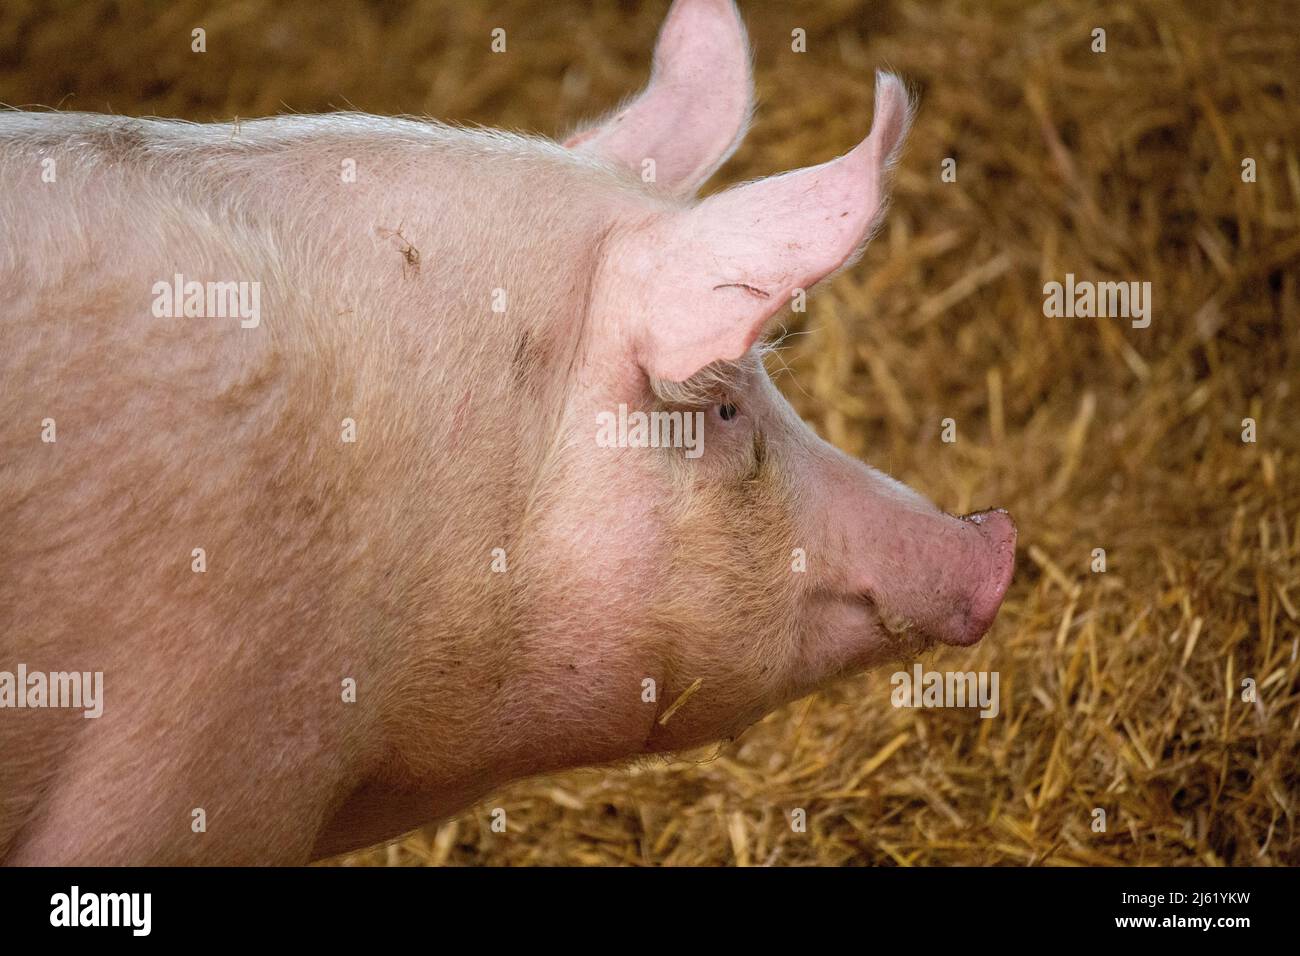 Species-appropriate pig husbandry with husbandry in stable groups of stalls, daylight, straw, individual feeding stalls and separate manure area Stock Photo